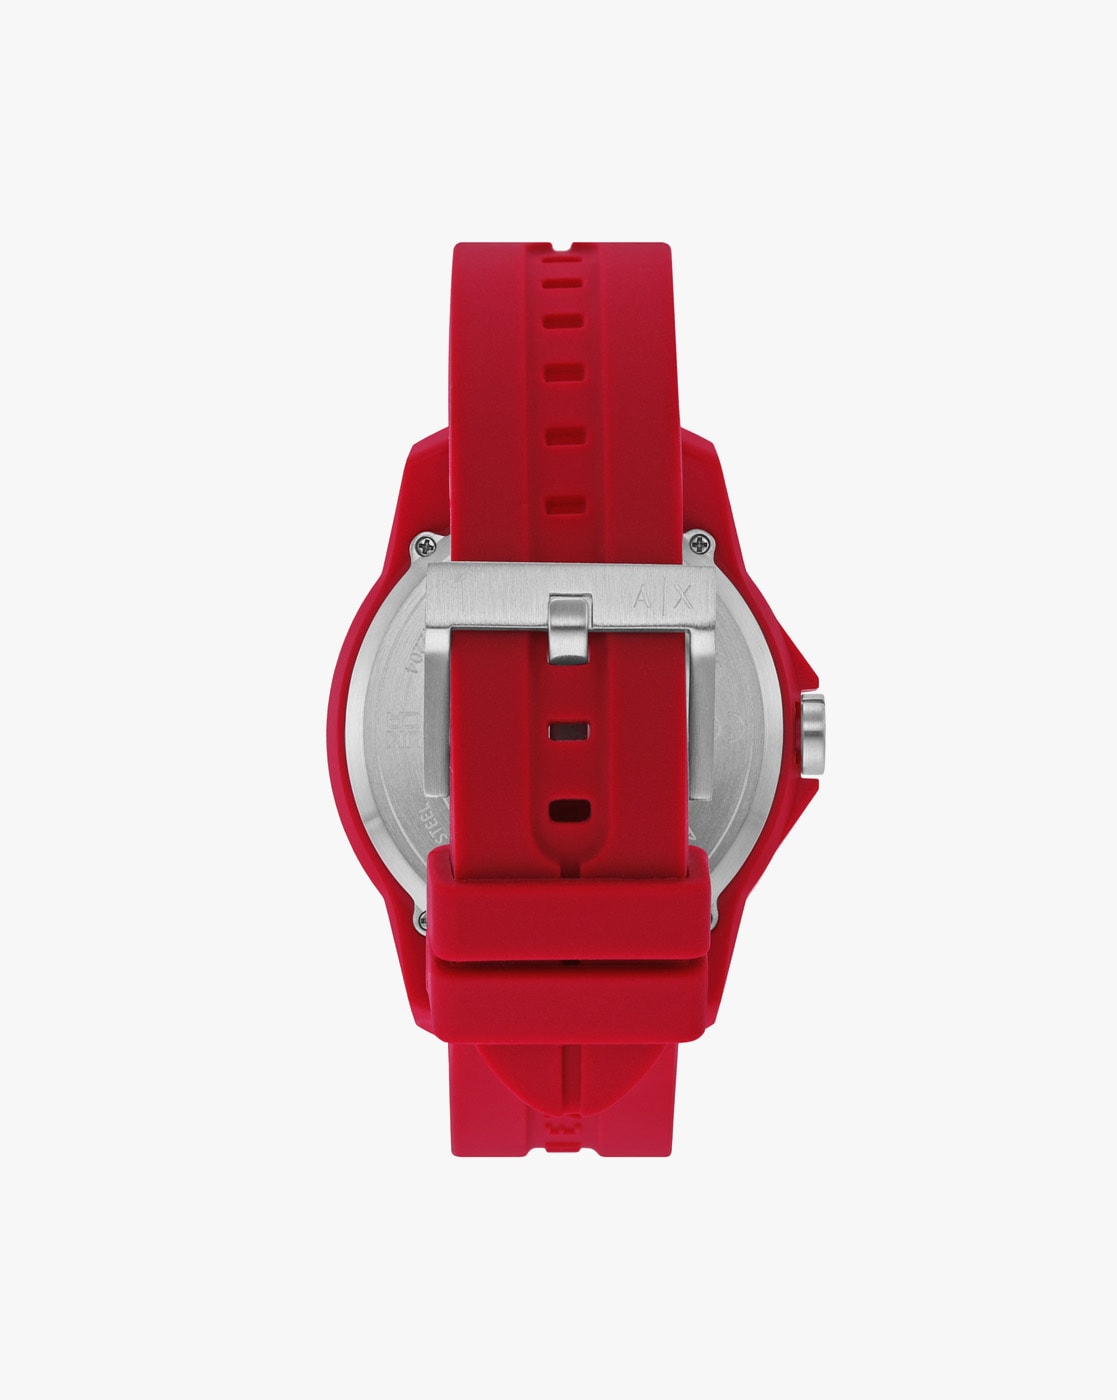 Men EXCHANGE Buy by Watches ARMANI Online for Red